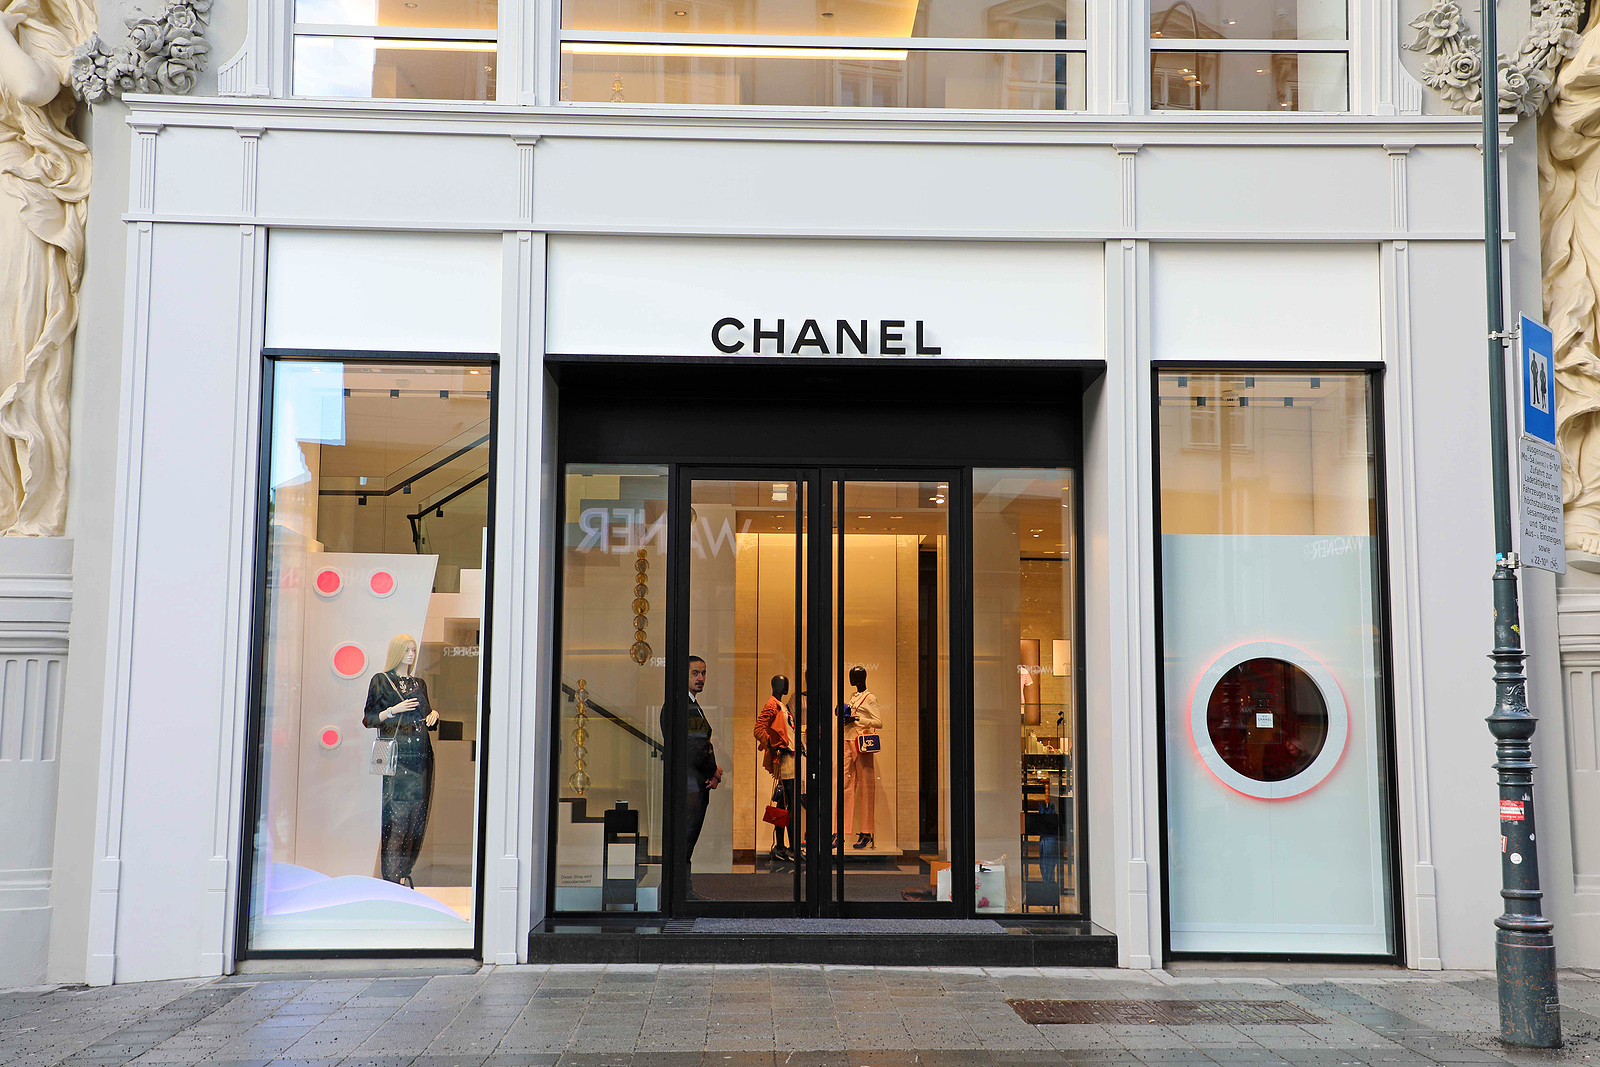 Top 5 World’s Bestselling Fashion Brands